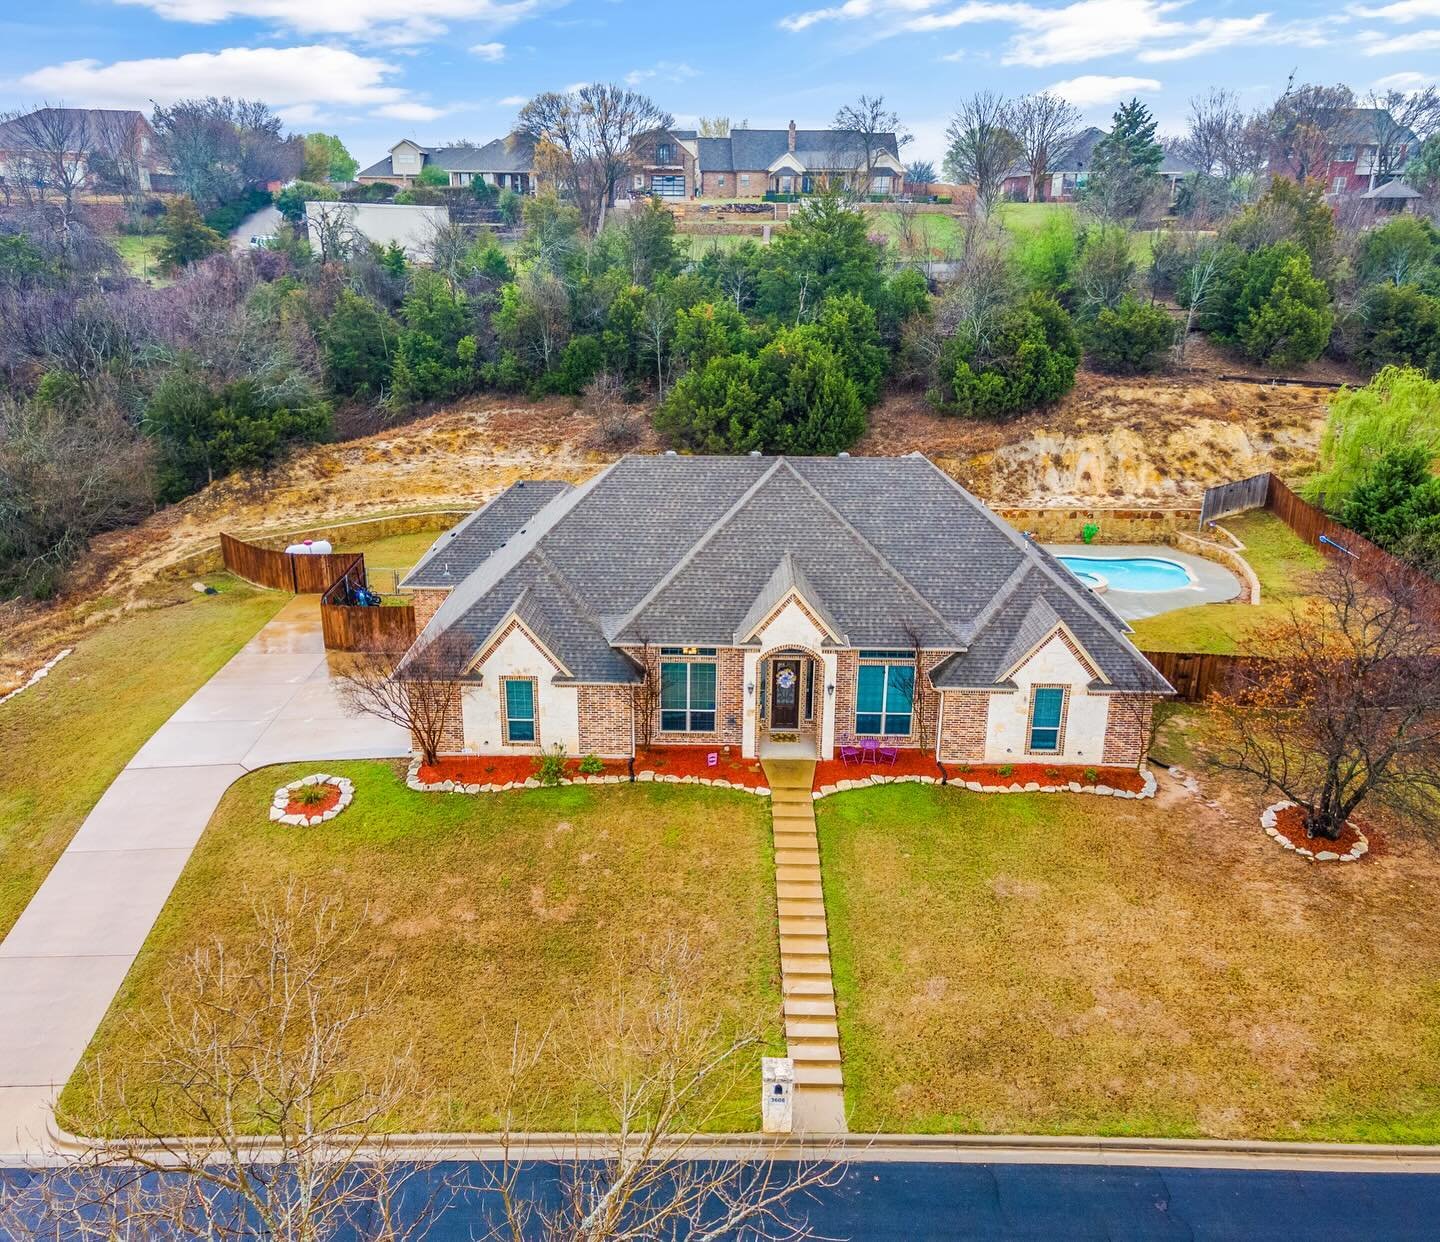 SOLLLLLD!🎉🙌. 3608 Foot Hills in Weatherford has sold! We quickly got this property under contract and was able to  negotiate a closing date that worked well  for both parties.  Does planning the timeline of selling your home stress you out? Let AGR